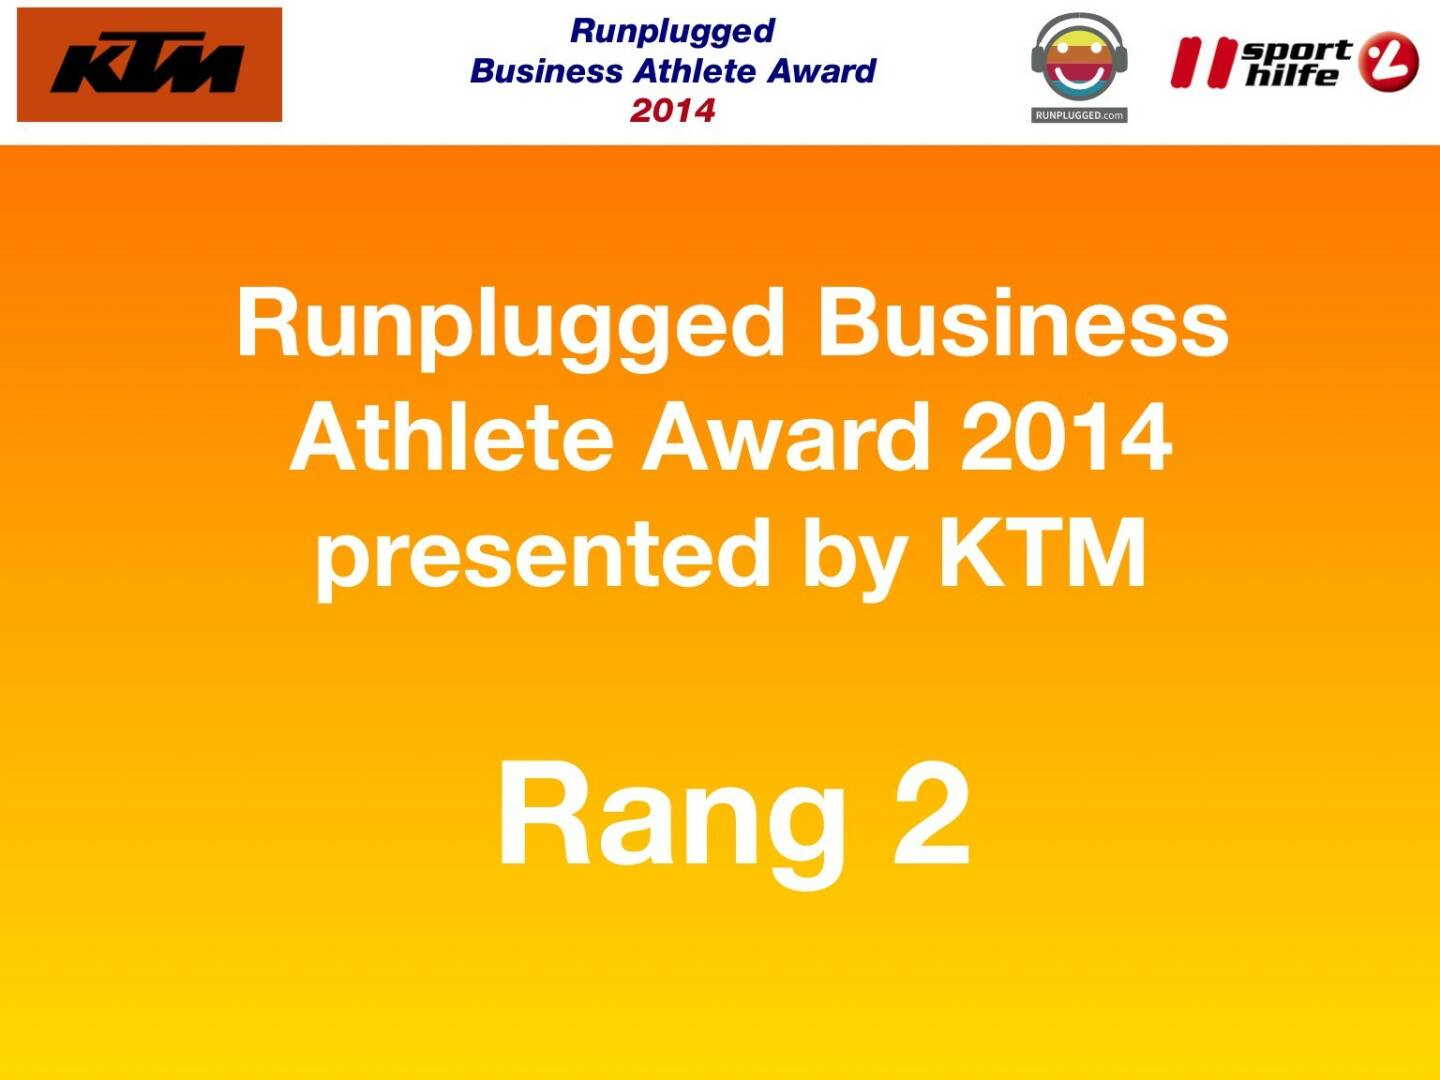 Runplugged Business Athlete Award 2014 presented by KTM Rang 2